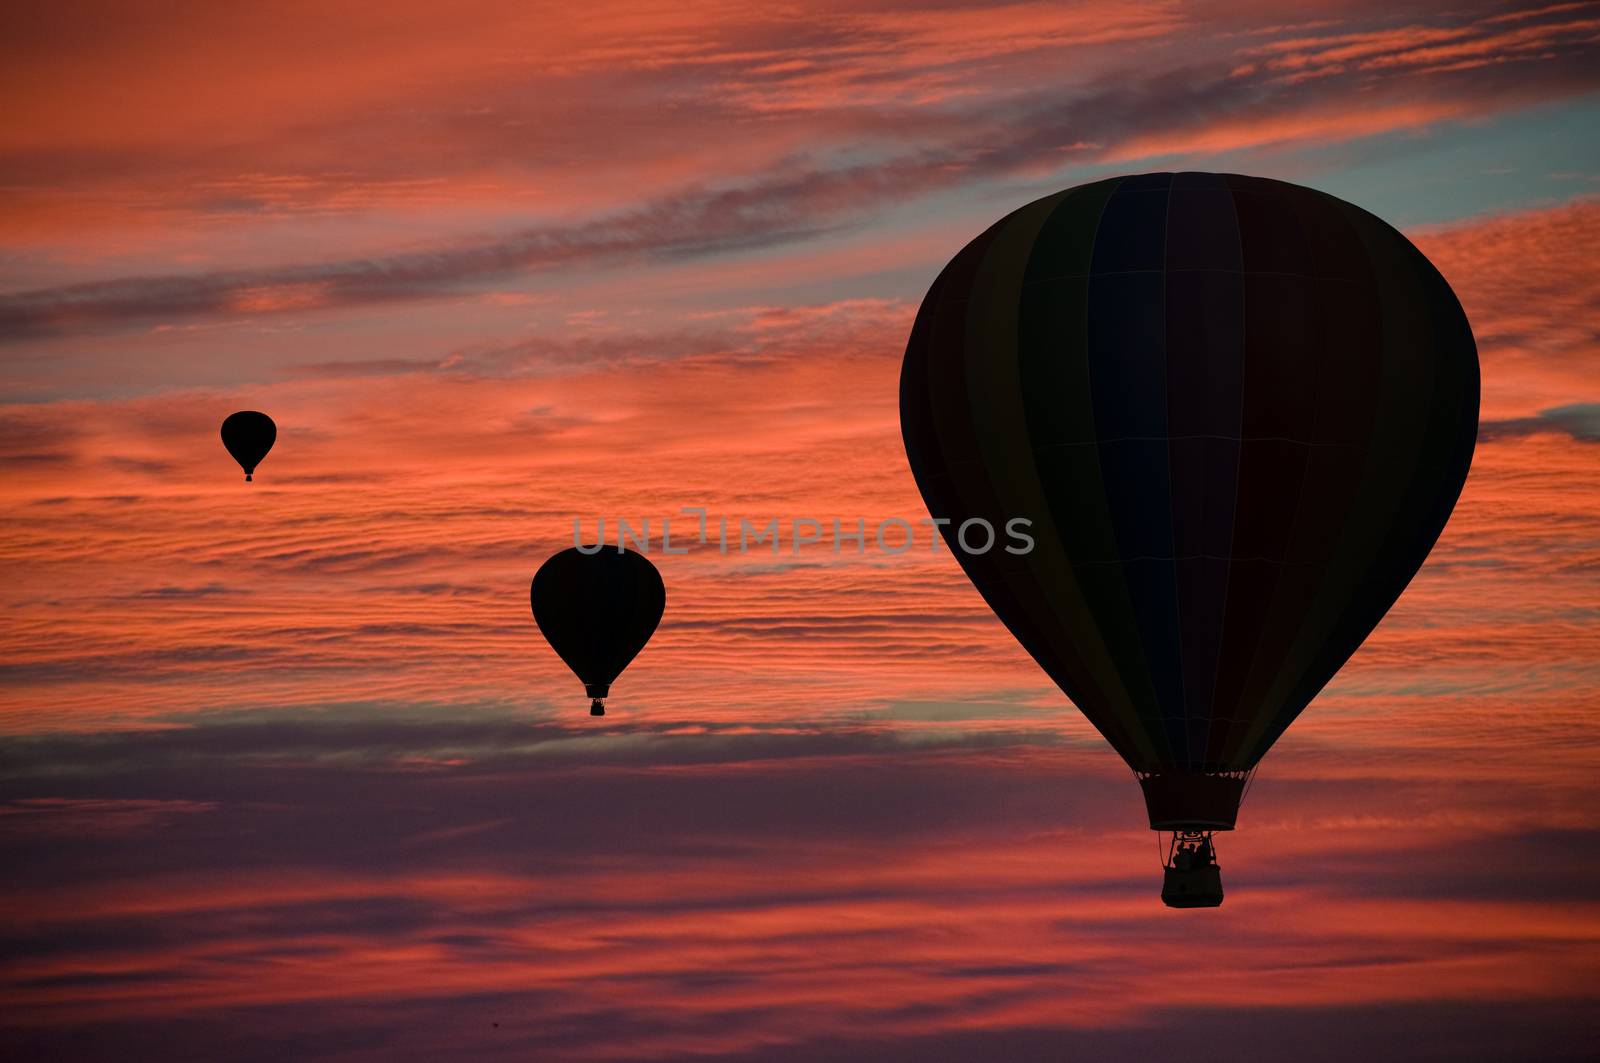 Hot-air balloons floating among clouds at dawn by Balefire9